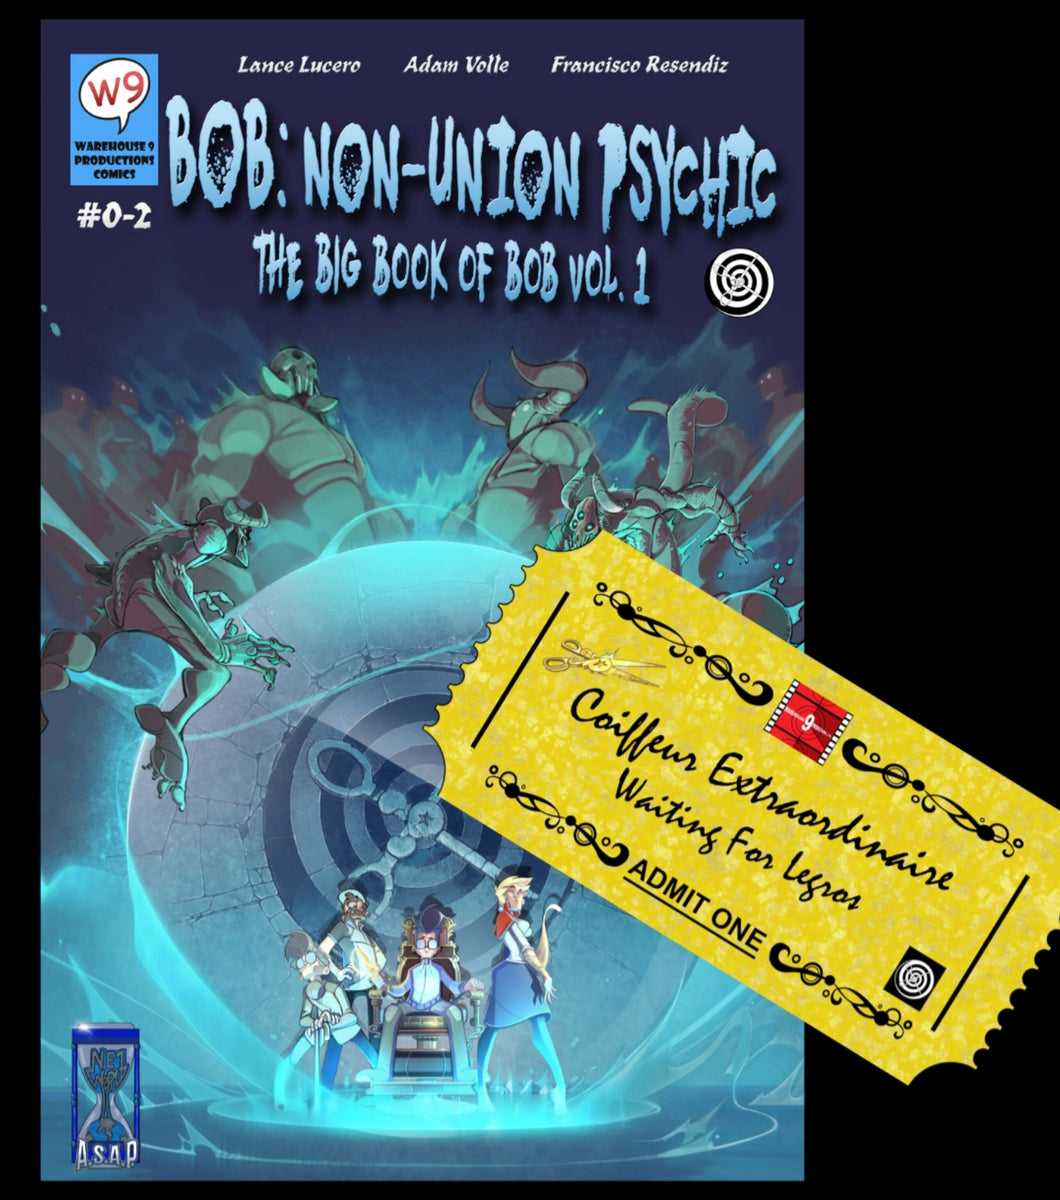 DIGITAL DOWNLOAD WITH FREE GOLDEN TICKET - BOB: NON-UNION PSYCHIC THE BIG BOOK OF BOB VOL.1